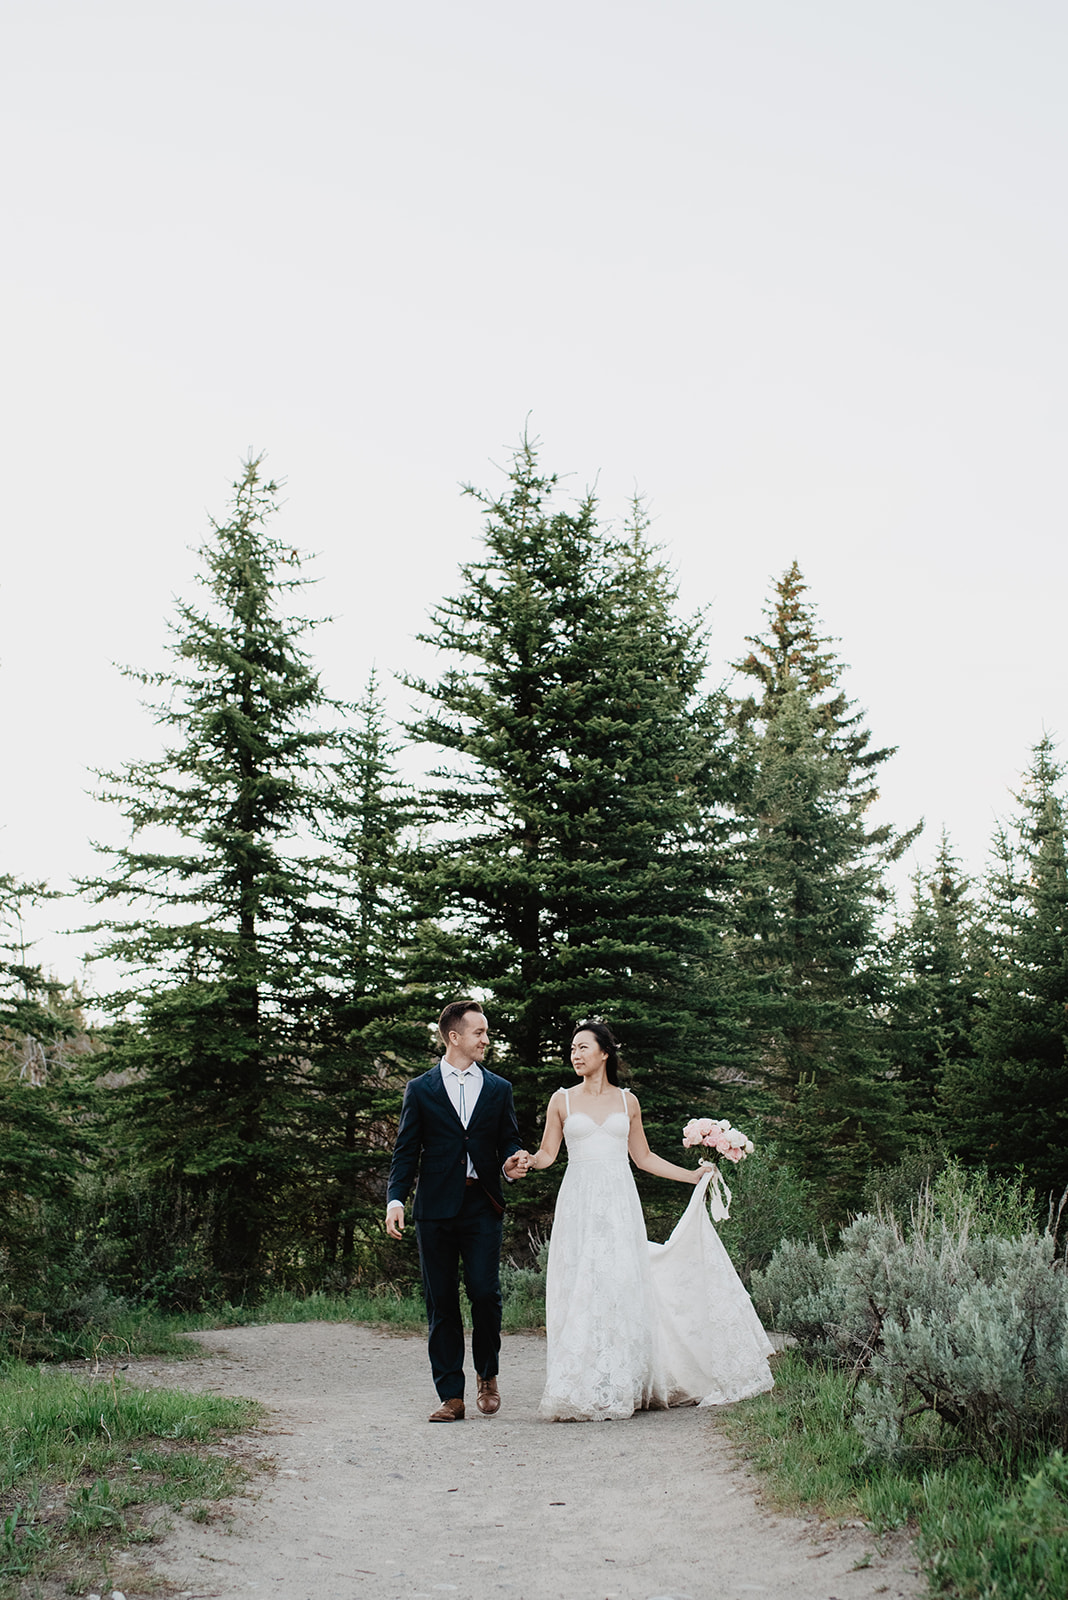 extended wedding photo shoot with Jackson Hole bride and groom holding hands and looking at one another as they stroll down a path with pine trees behind